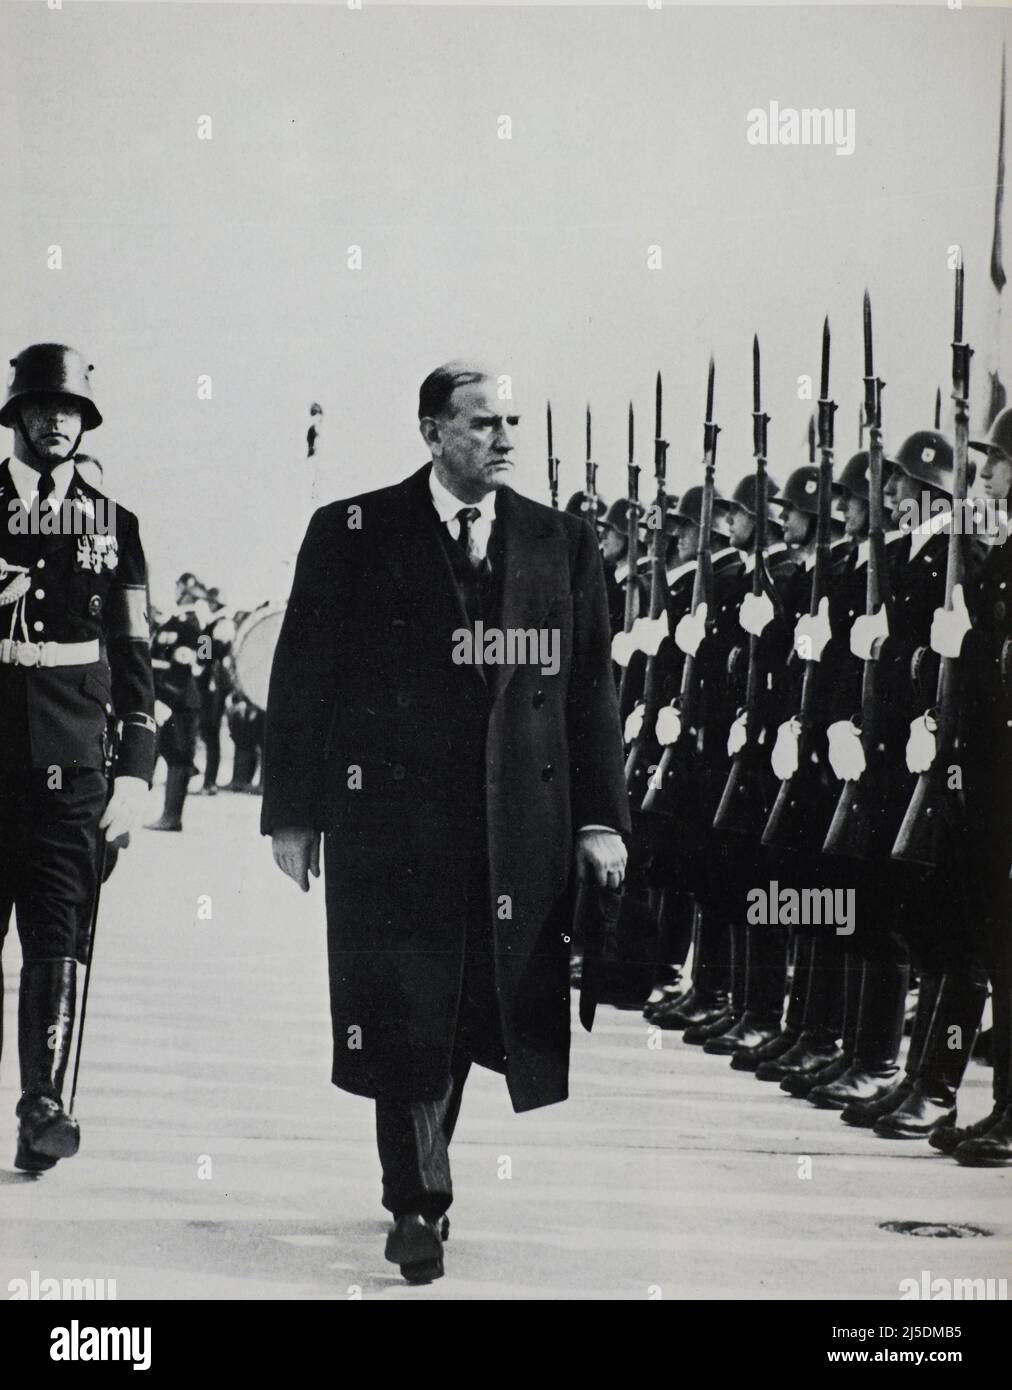 Eng translation : ' THE ARRIVAL OF M. EDOUARD DALADIER IN MUNICH ON SEPTEMBER 29 On his descent from the plane, the President of the French Council reviews the company of honor ' - Extract from 'L'Illustration Journal Universel' - French illustrated magazine - 1938 Stock Photo